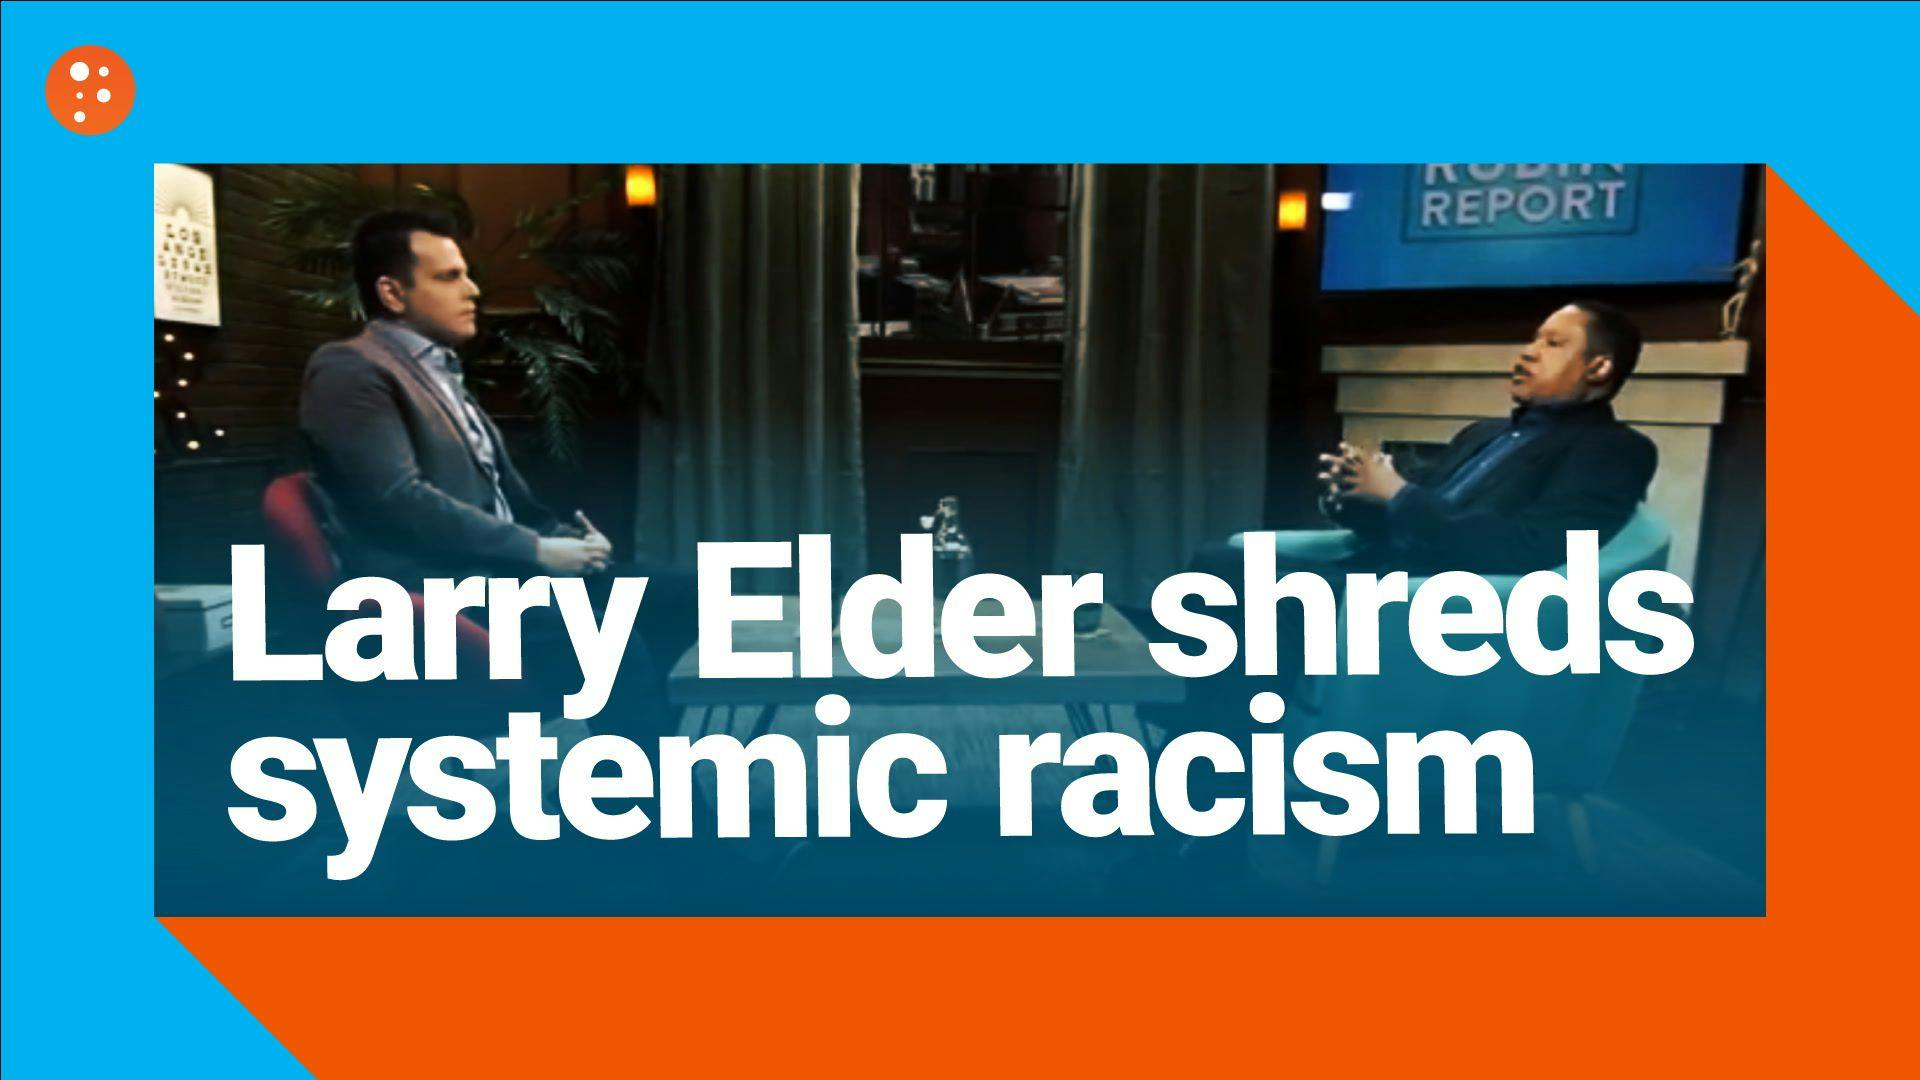 Larry Elder Eviscerates the Myth of 'Systemic Racism'